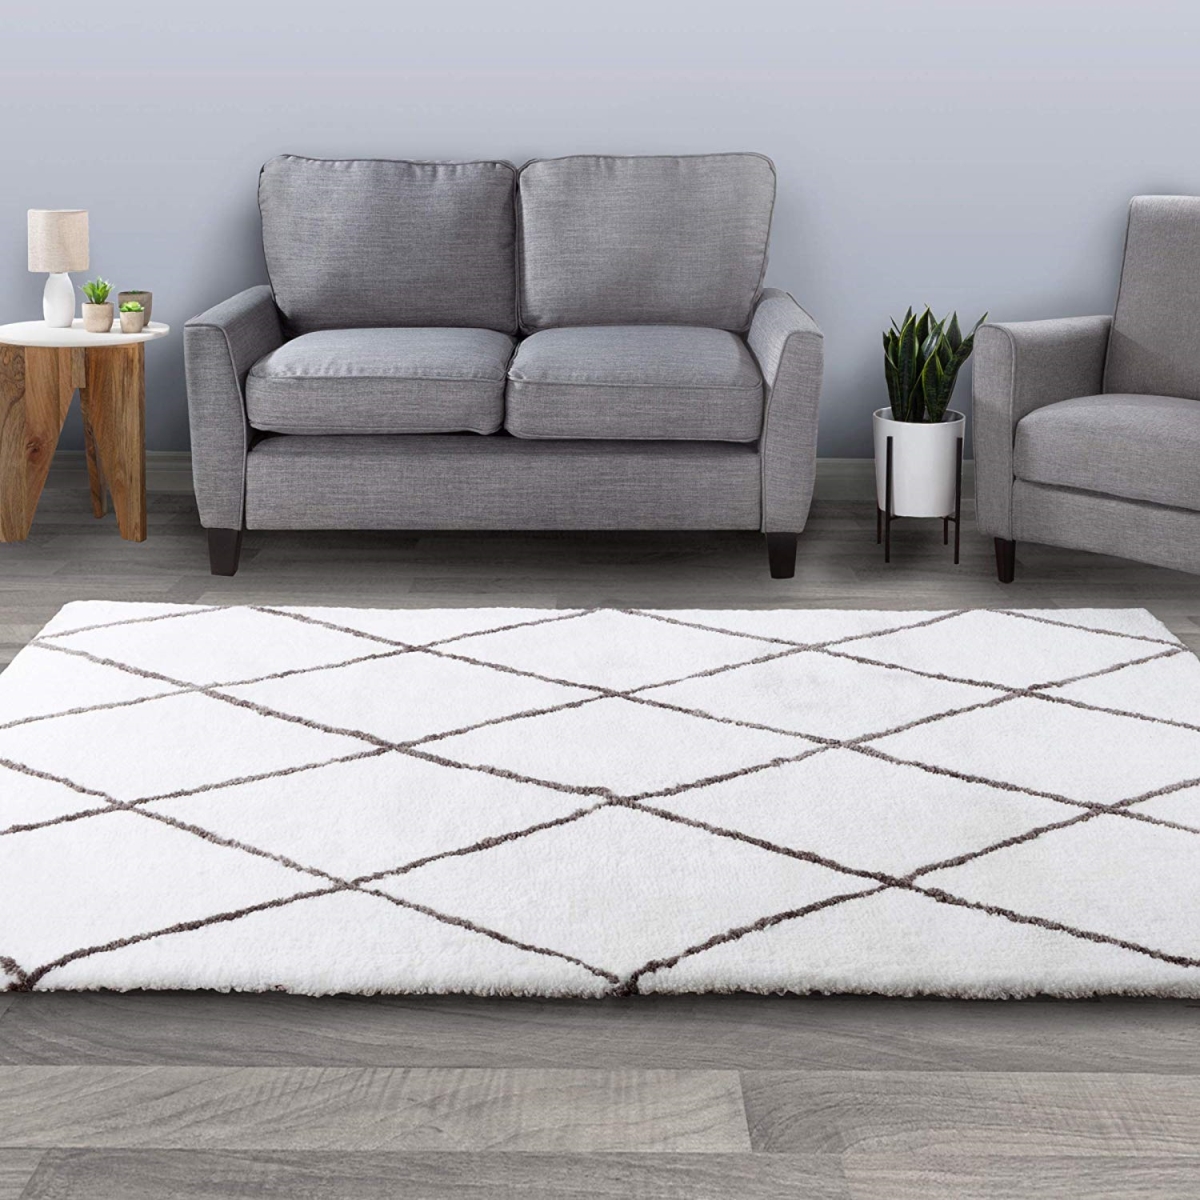 62a-64333 5 Ft. 3 In. X 7 Ft. 7 In. Diamond Shag Area Rug-plush Pattern Carpet, Ivory & Gray